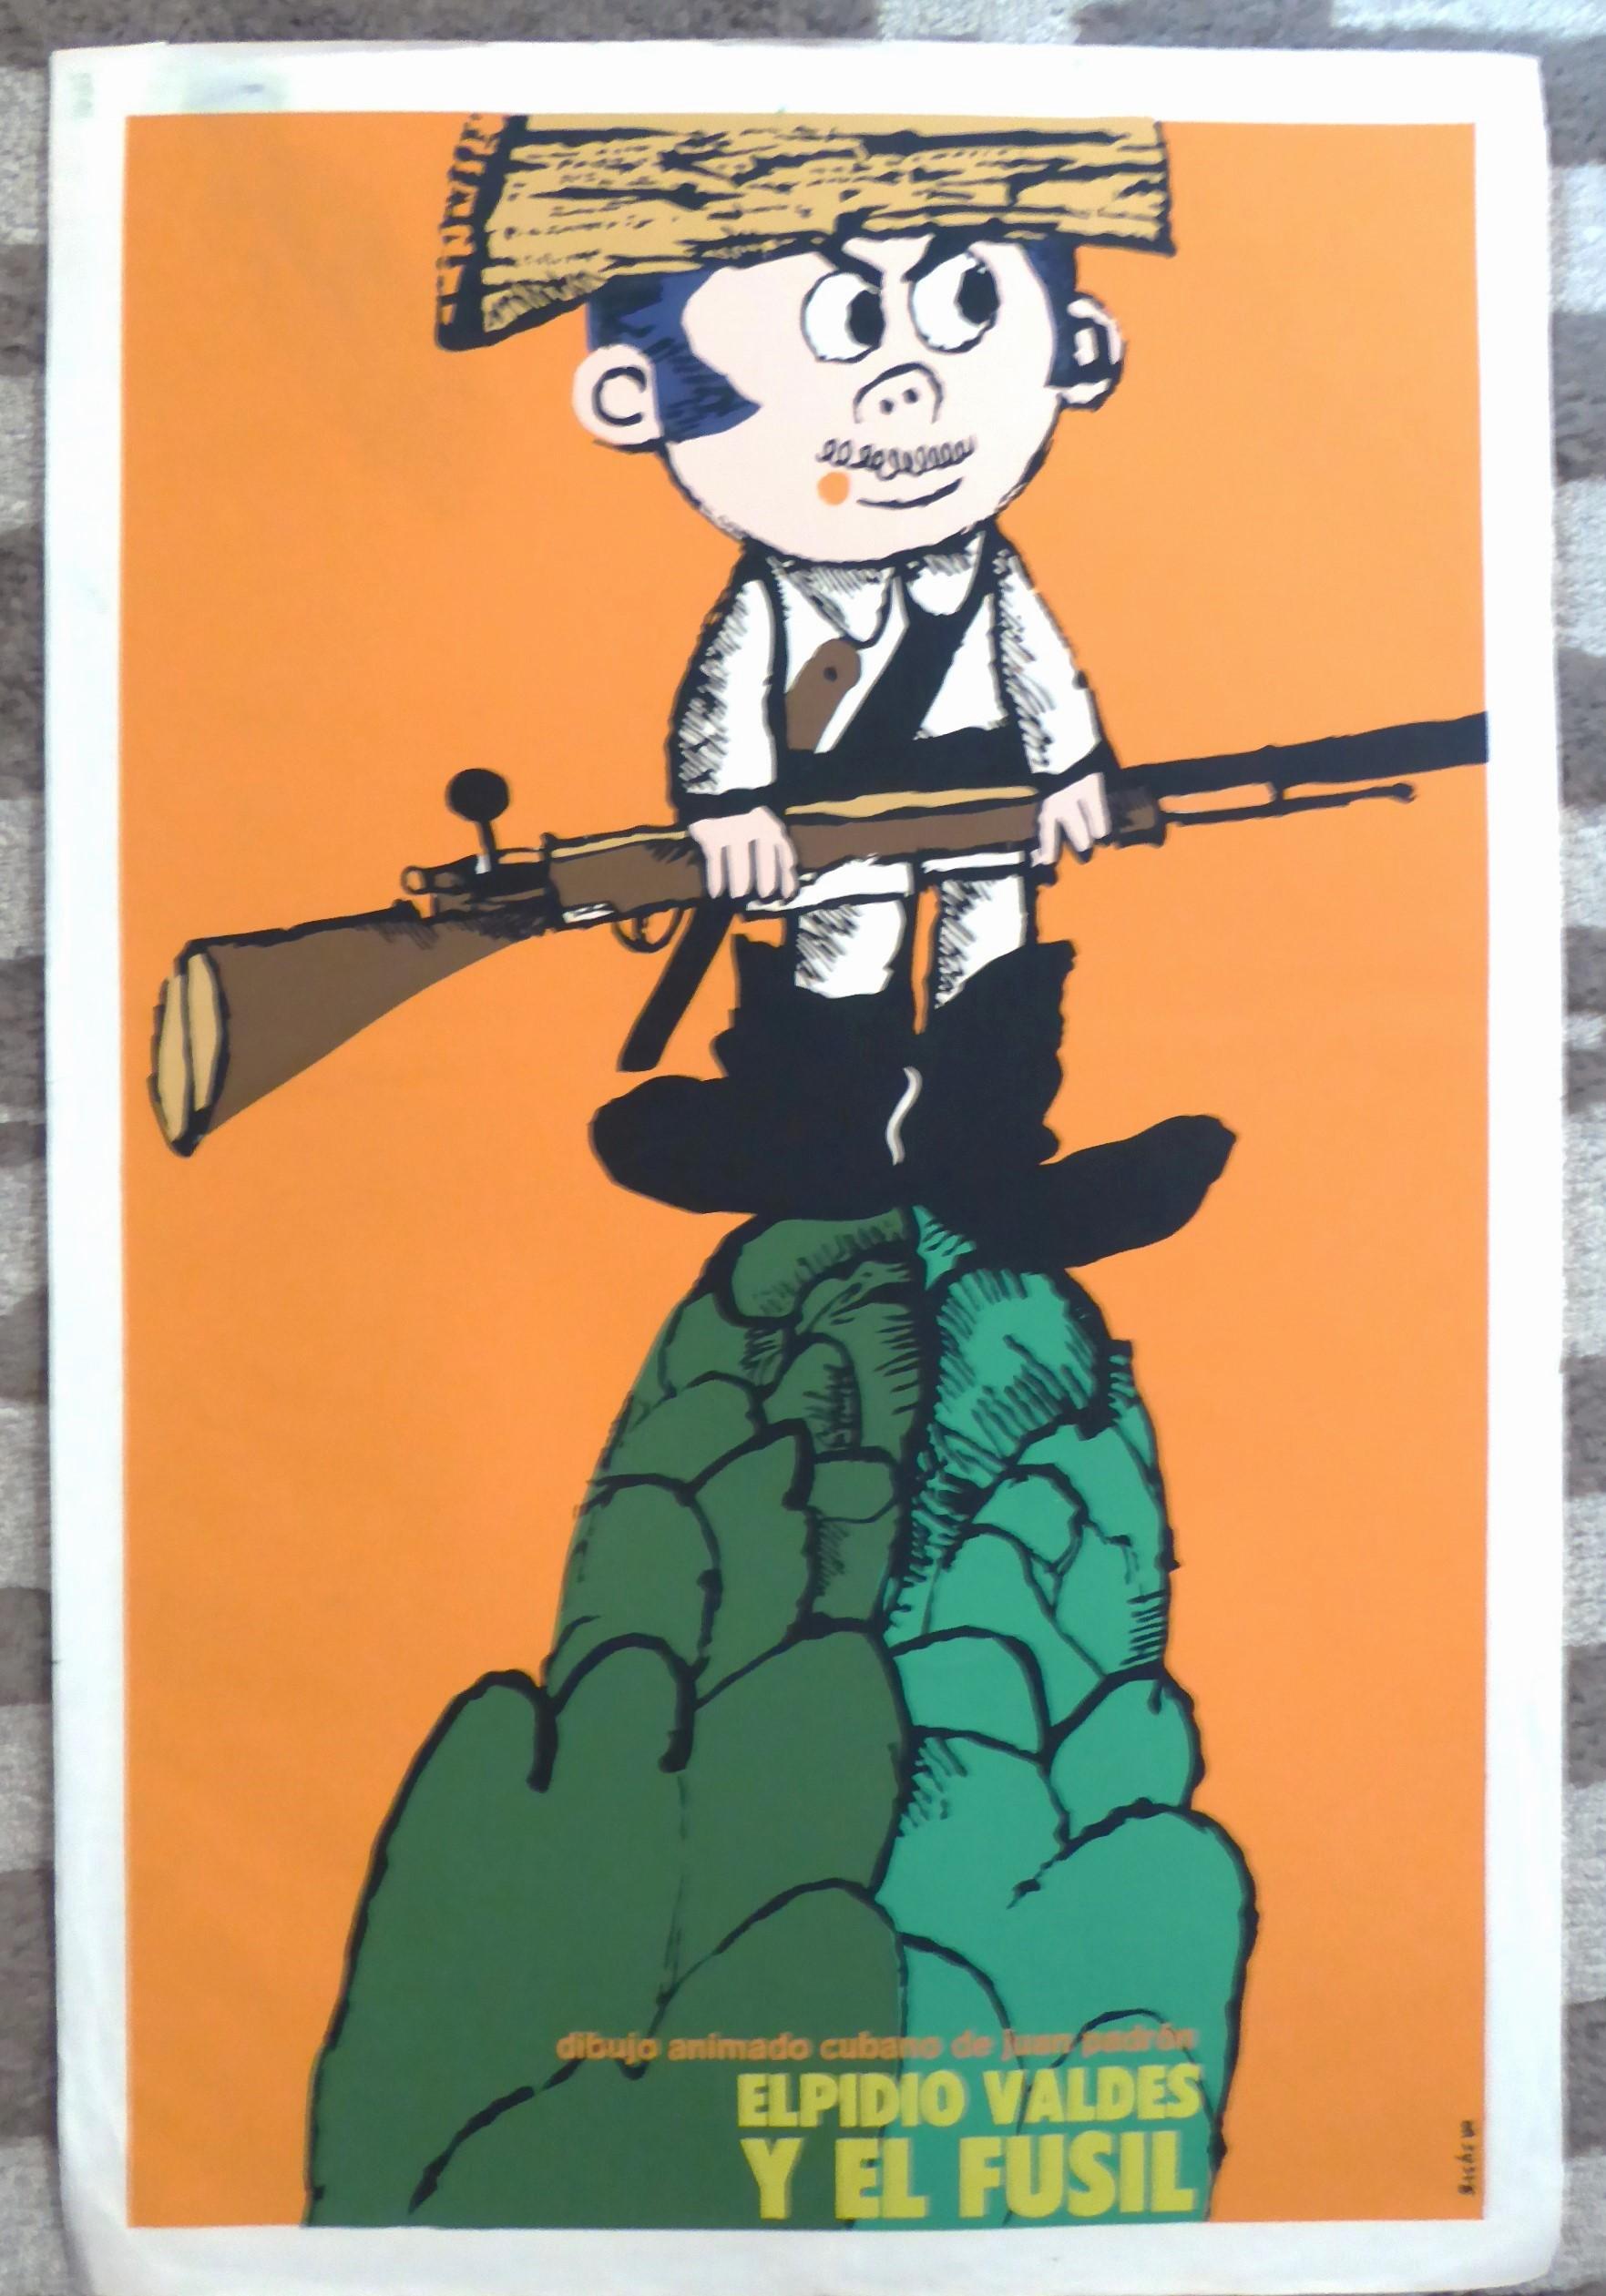 Late 20th Century Cuban Animated Film Poster Juan Padron –Elpidio Valdes y el Fusil– by Bachs 1980 For Sale